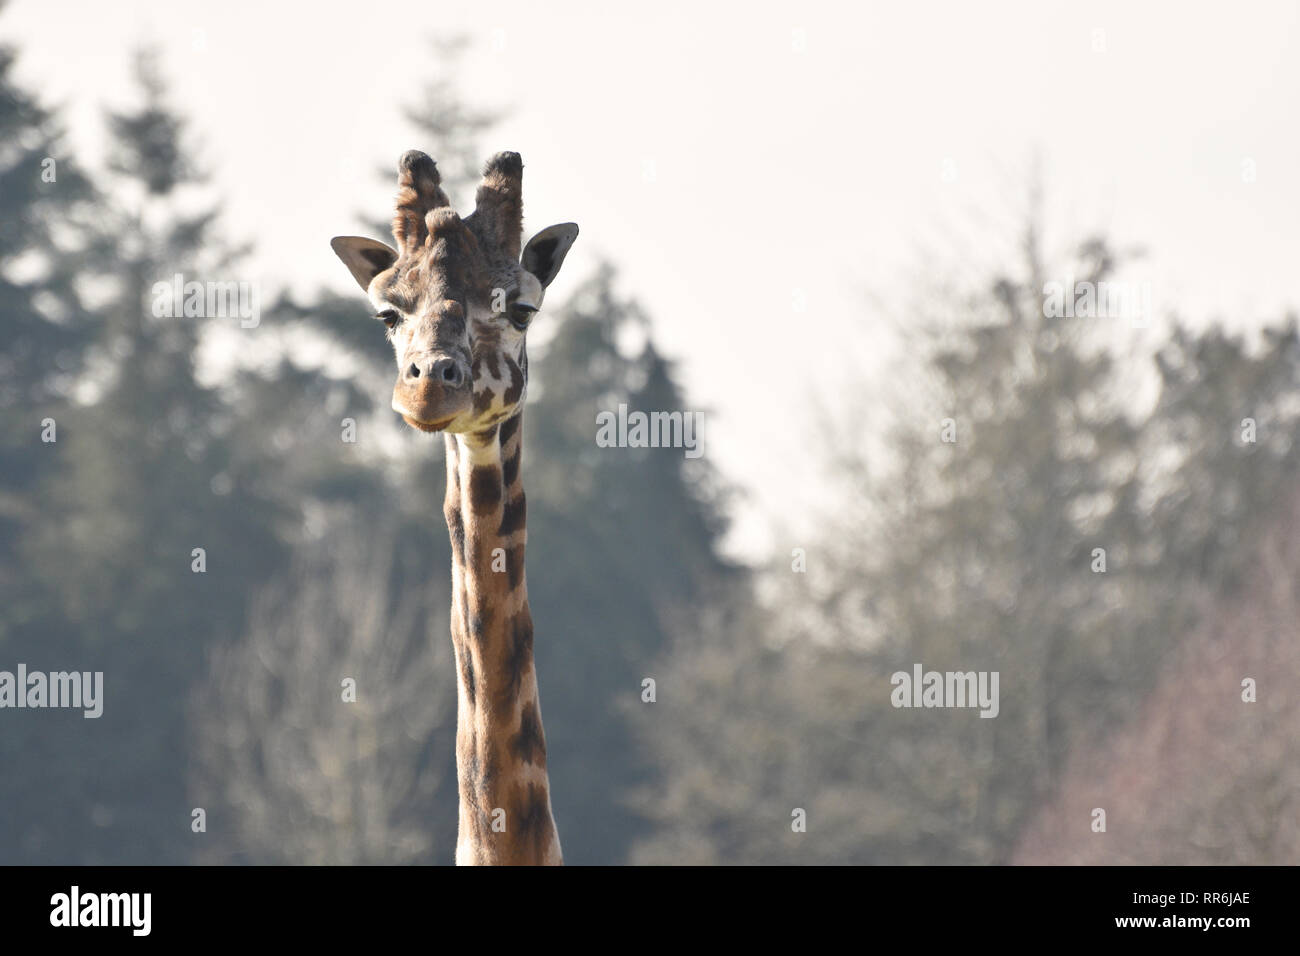 African Giraffe head and neck portrait with space for copy / text Stock Photo